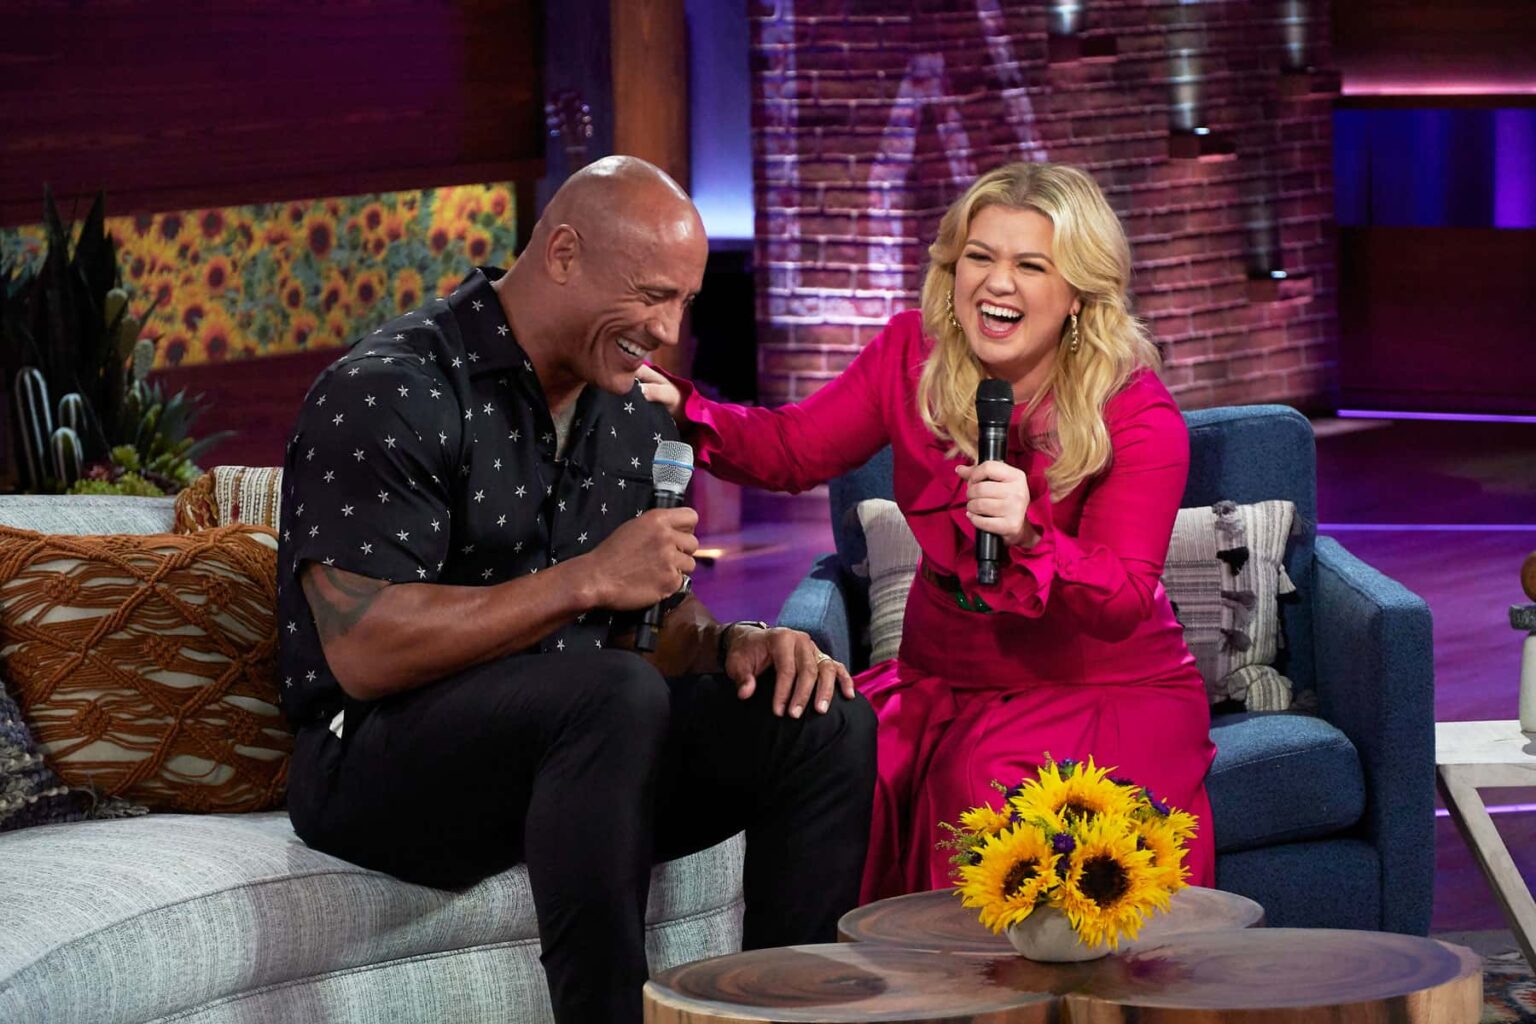 'The Kelly Clarkson Show' is a daytime variety talk show hosted by singer Kelly Clarkson. Could Kelly dethrone Ellen DeGeneres?